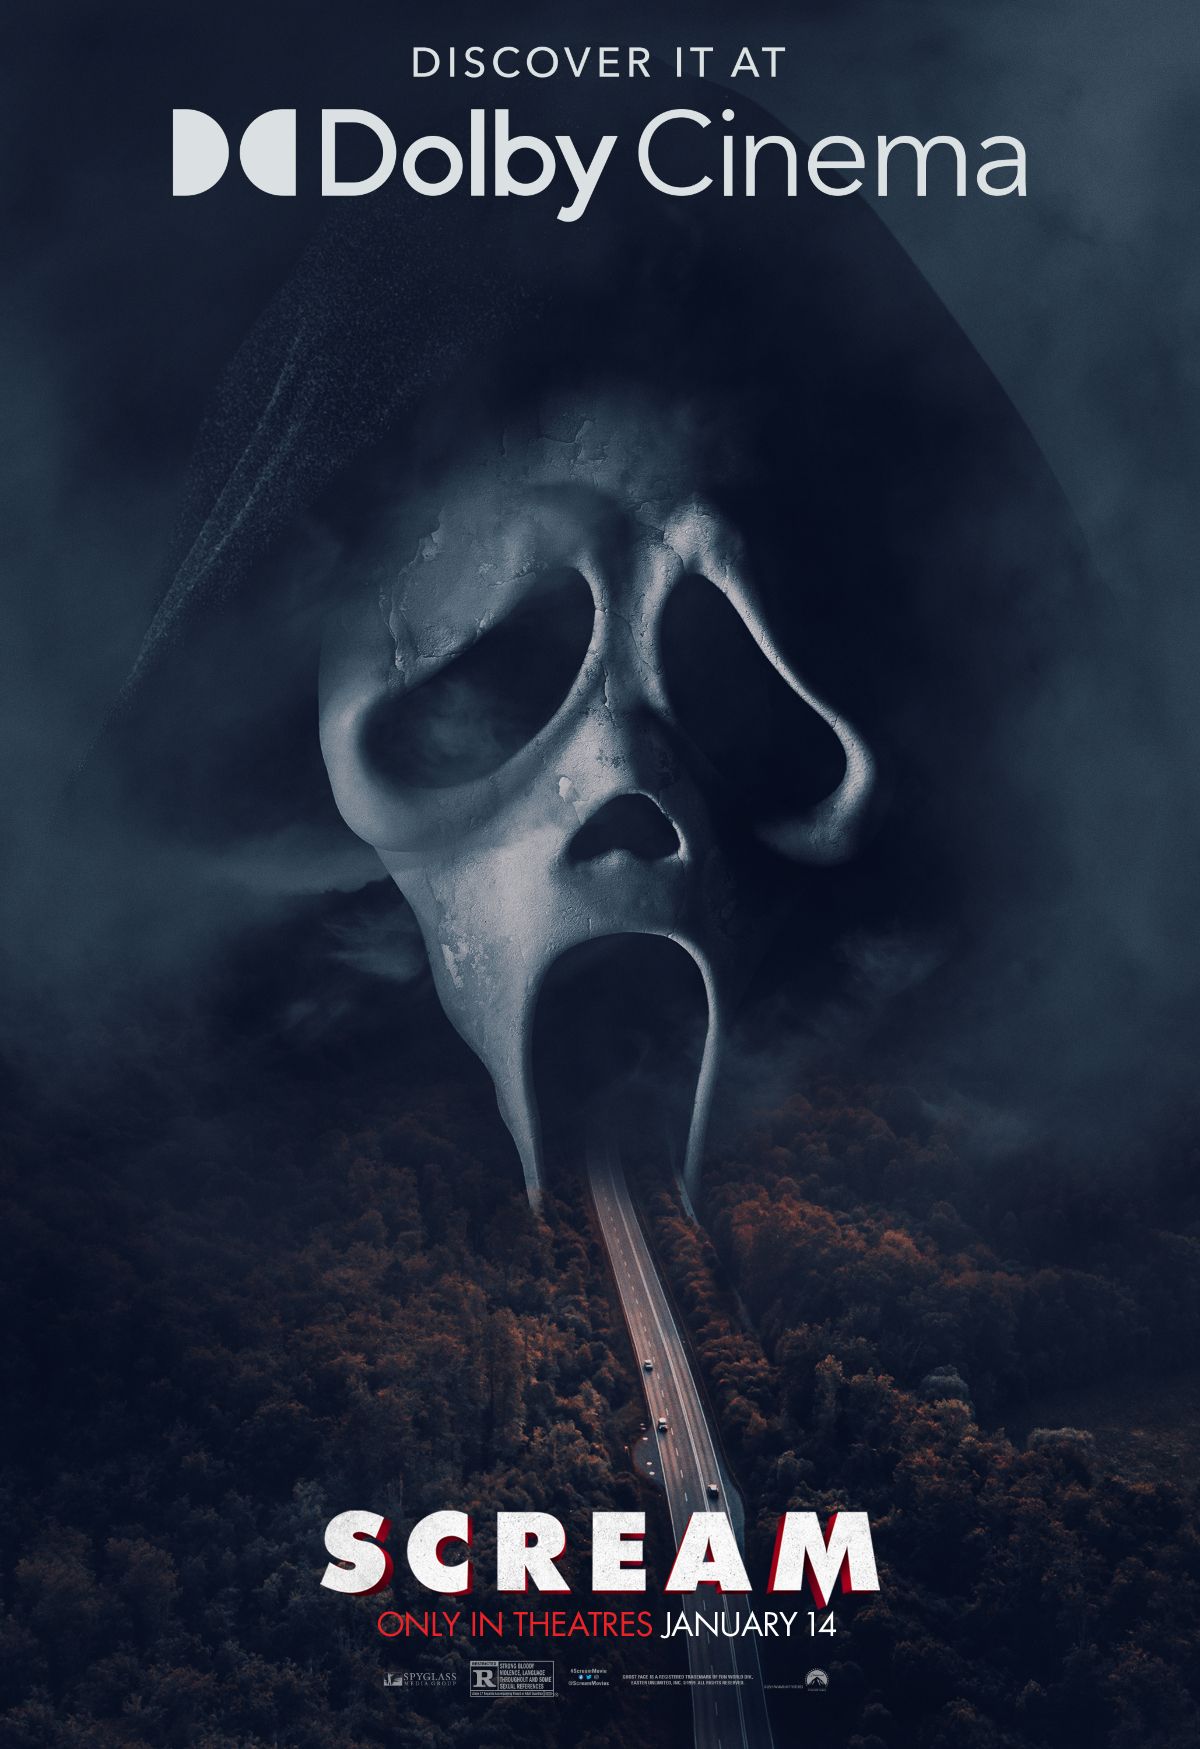 Scream 5 Dolby Poster Draws Us Into the Town of Woodsboro